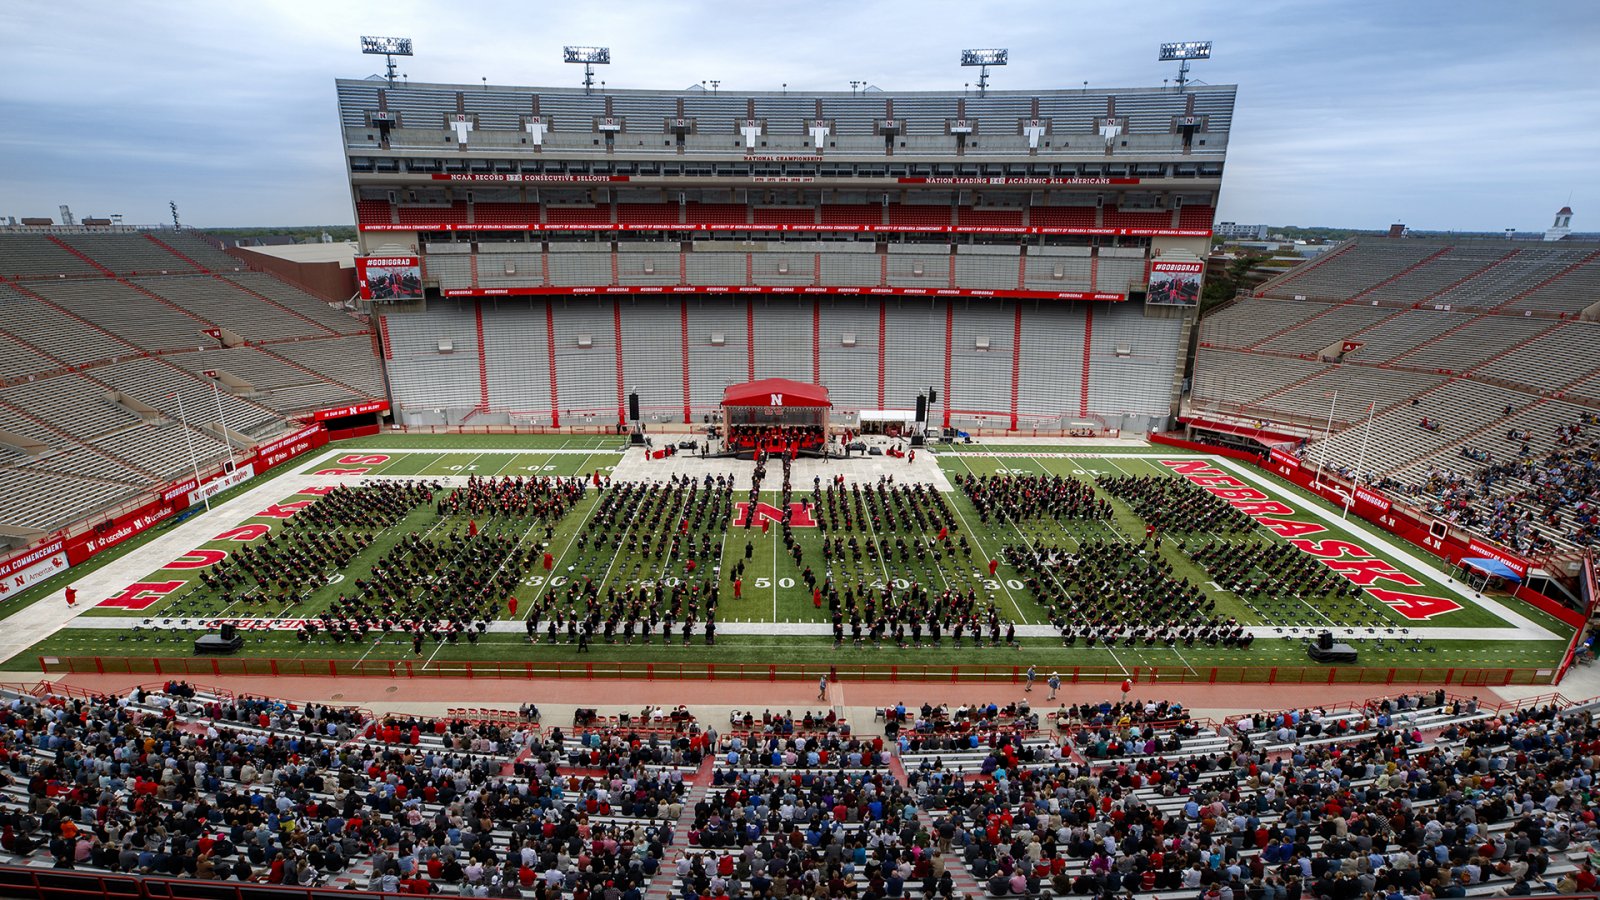 Eleven students from the College of Engineering will be honored as Chancellor's Scholars during the May 14 spring undergraduate commencement at Memorial Stadium.